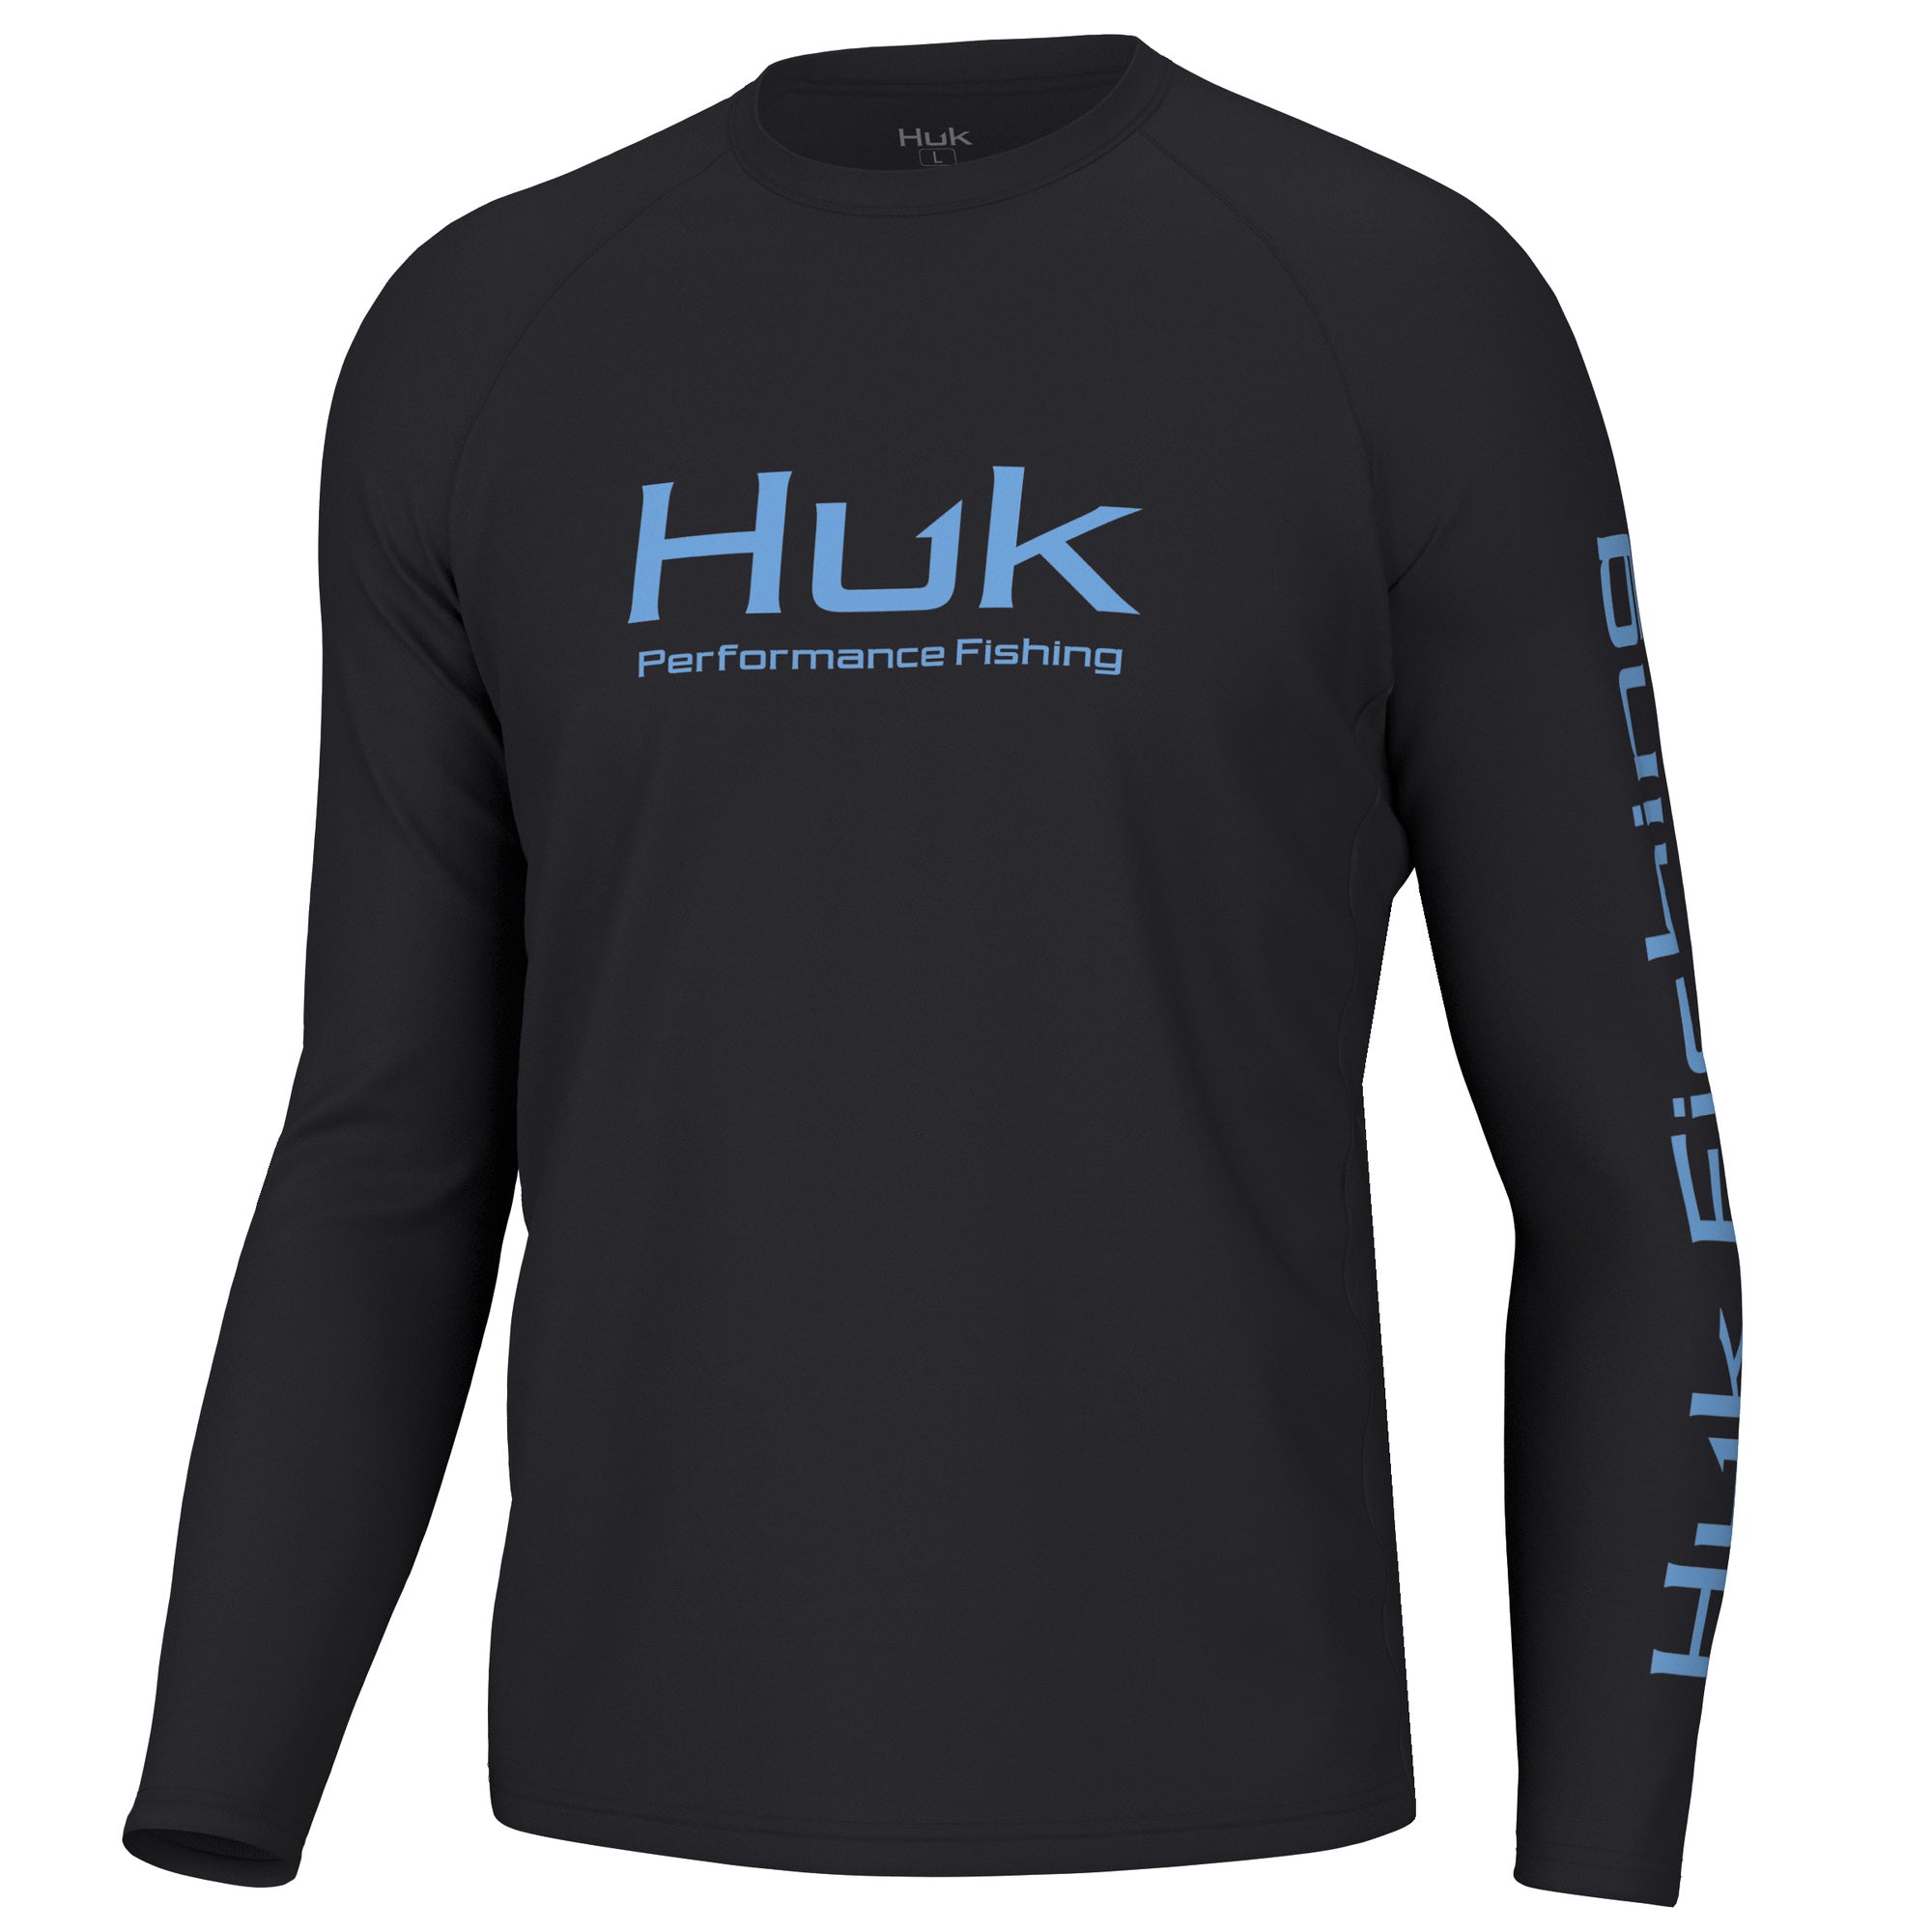 huk shirts for men - OFF-59% >Free Delivery